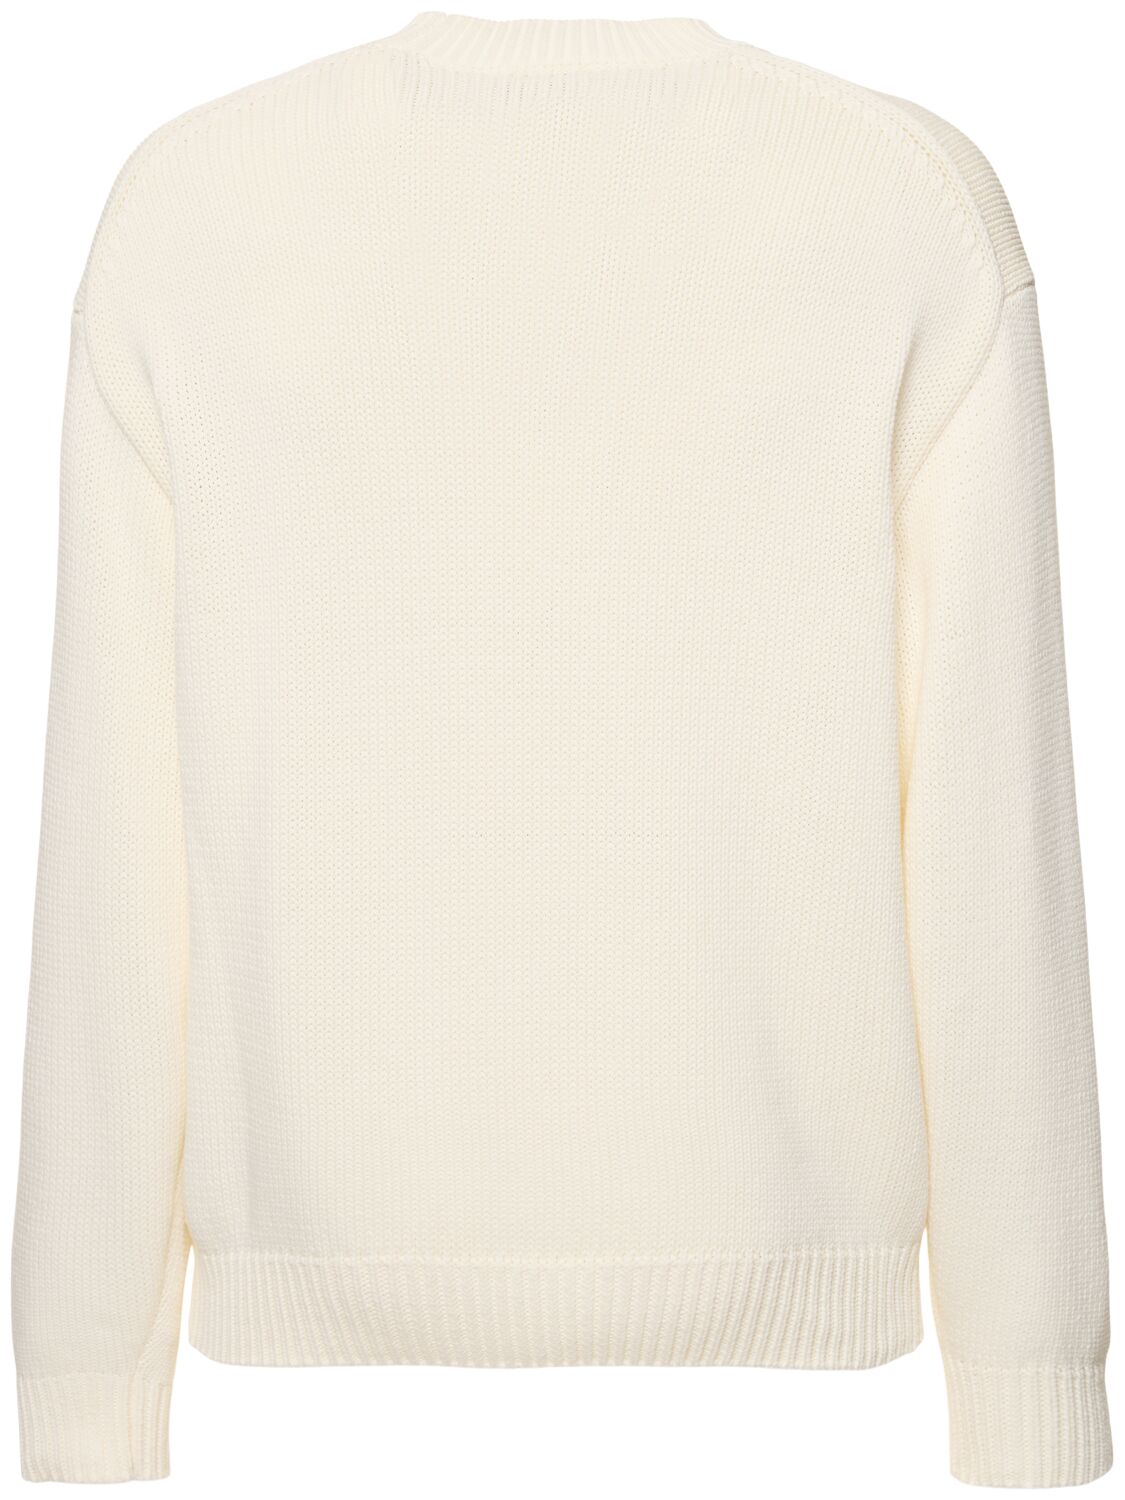 Shop Kenzo Tiger Cotton Blend Knit Sweater In White